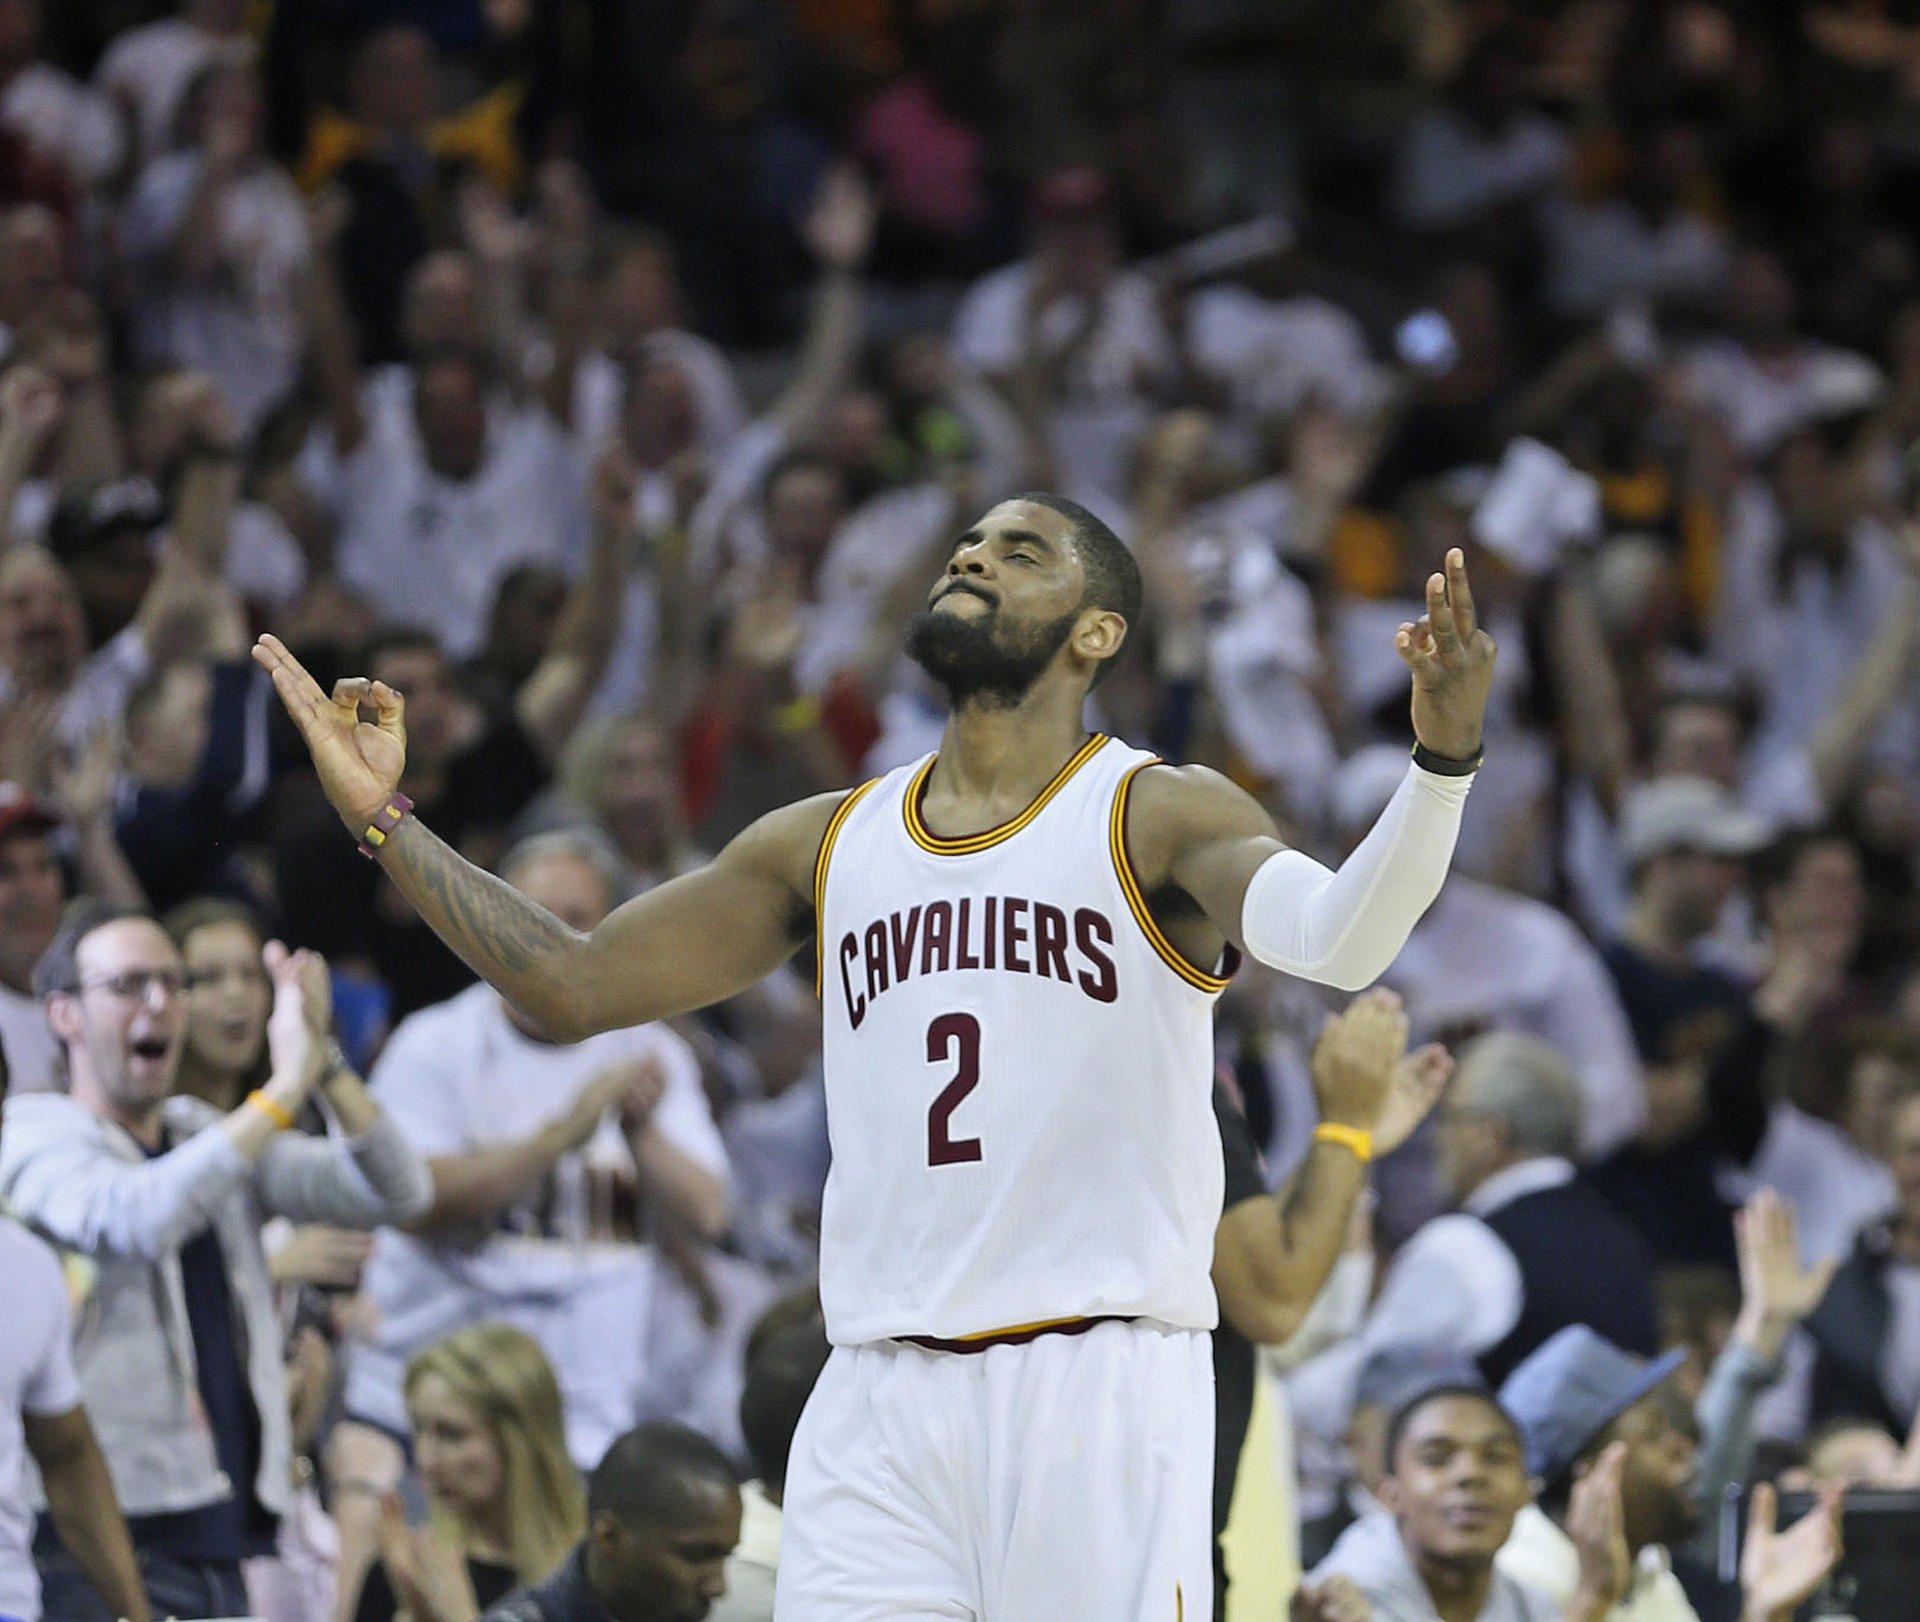 The Cavaliers' Kyrie Irving celebrates after he sinks a three-pointer against the Boston Celtics at Quicken Loans Arena. Irving scored 30 points for his team. Photo: TNS